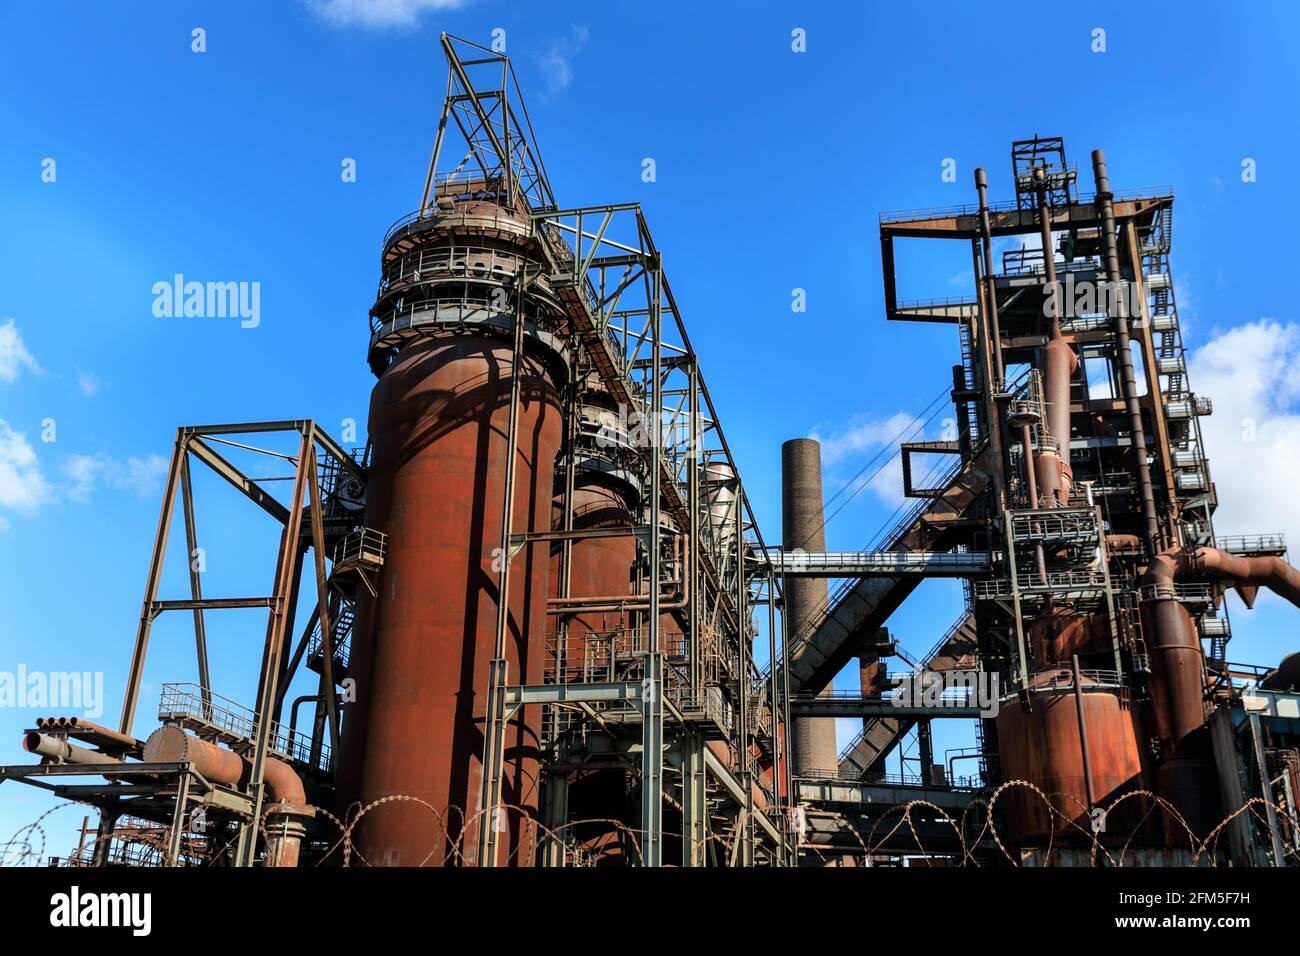 The disused Phoenix West  blast furnace ironworks and steelworks, formerly part of ThyssenKrupp Steel  in Dortmund, Germany Stock Photo